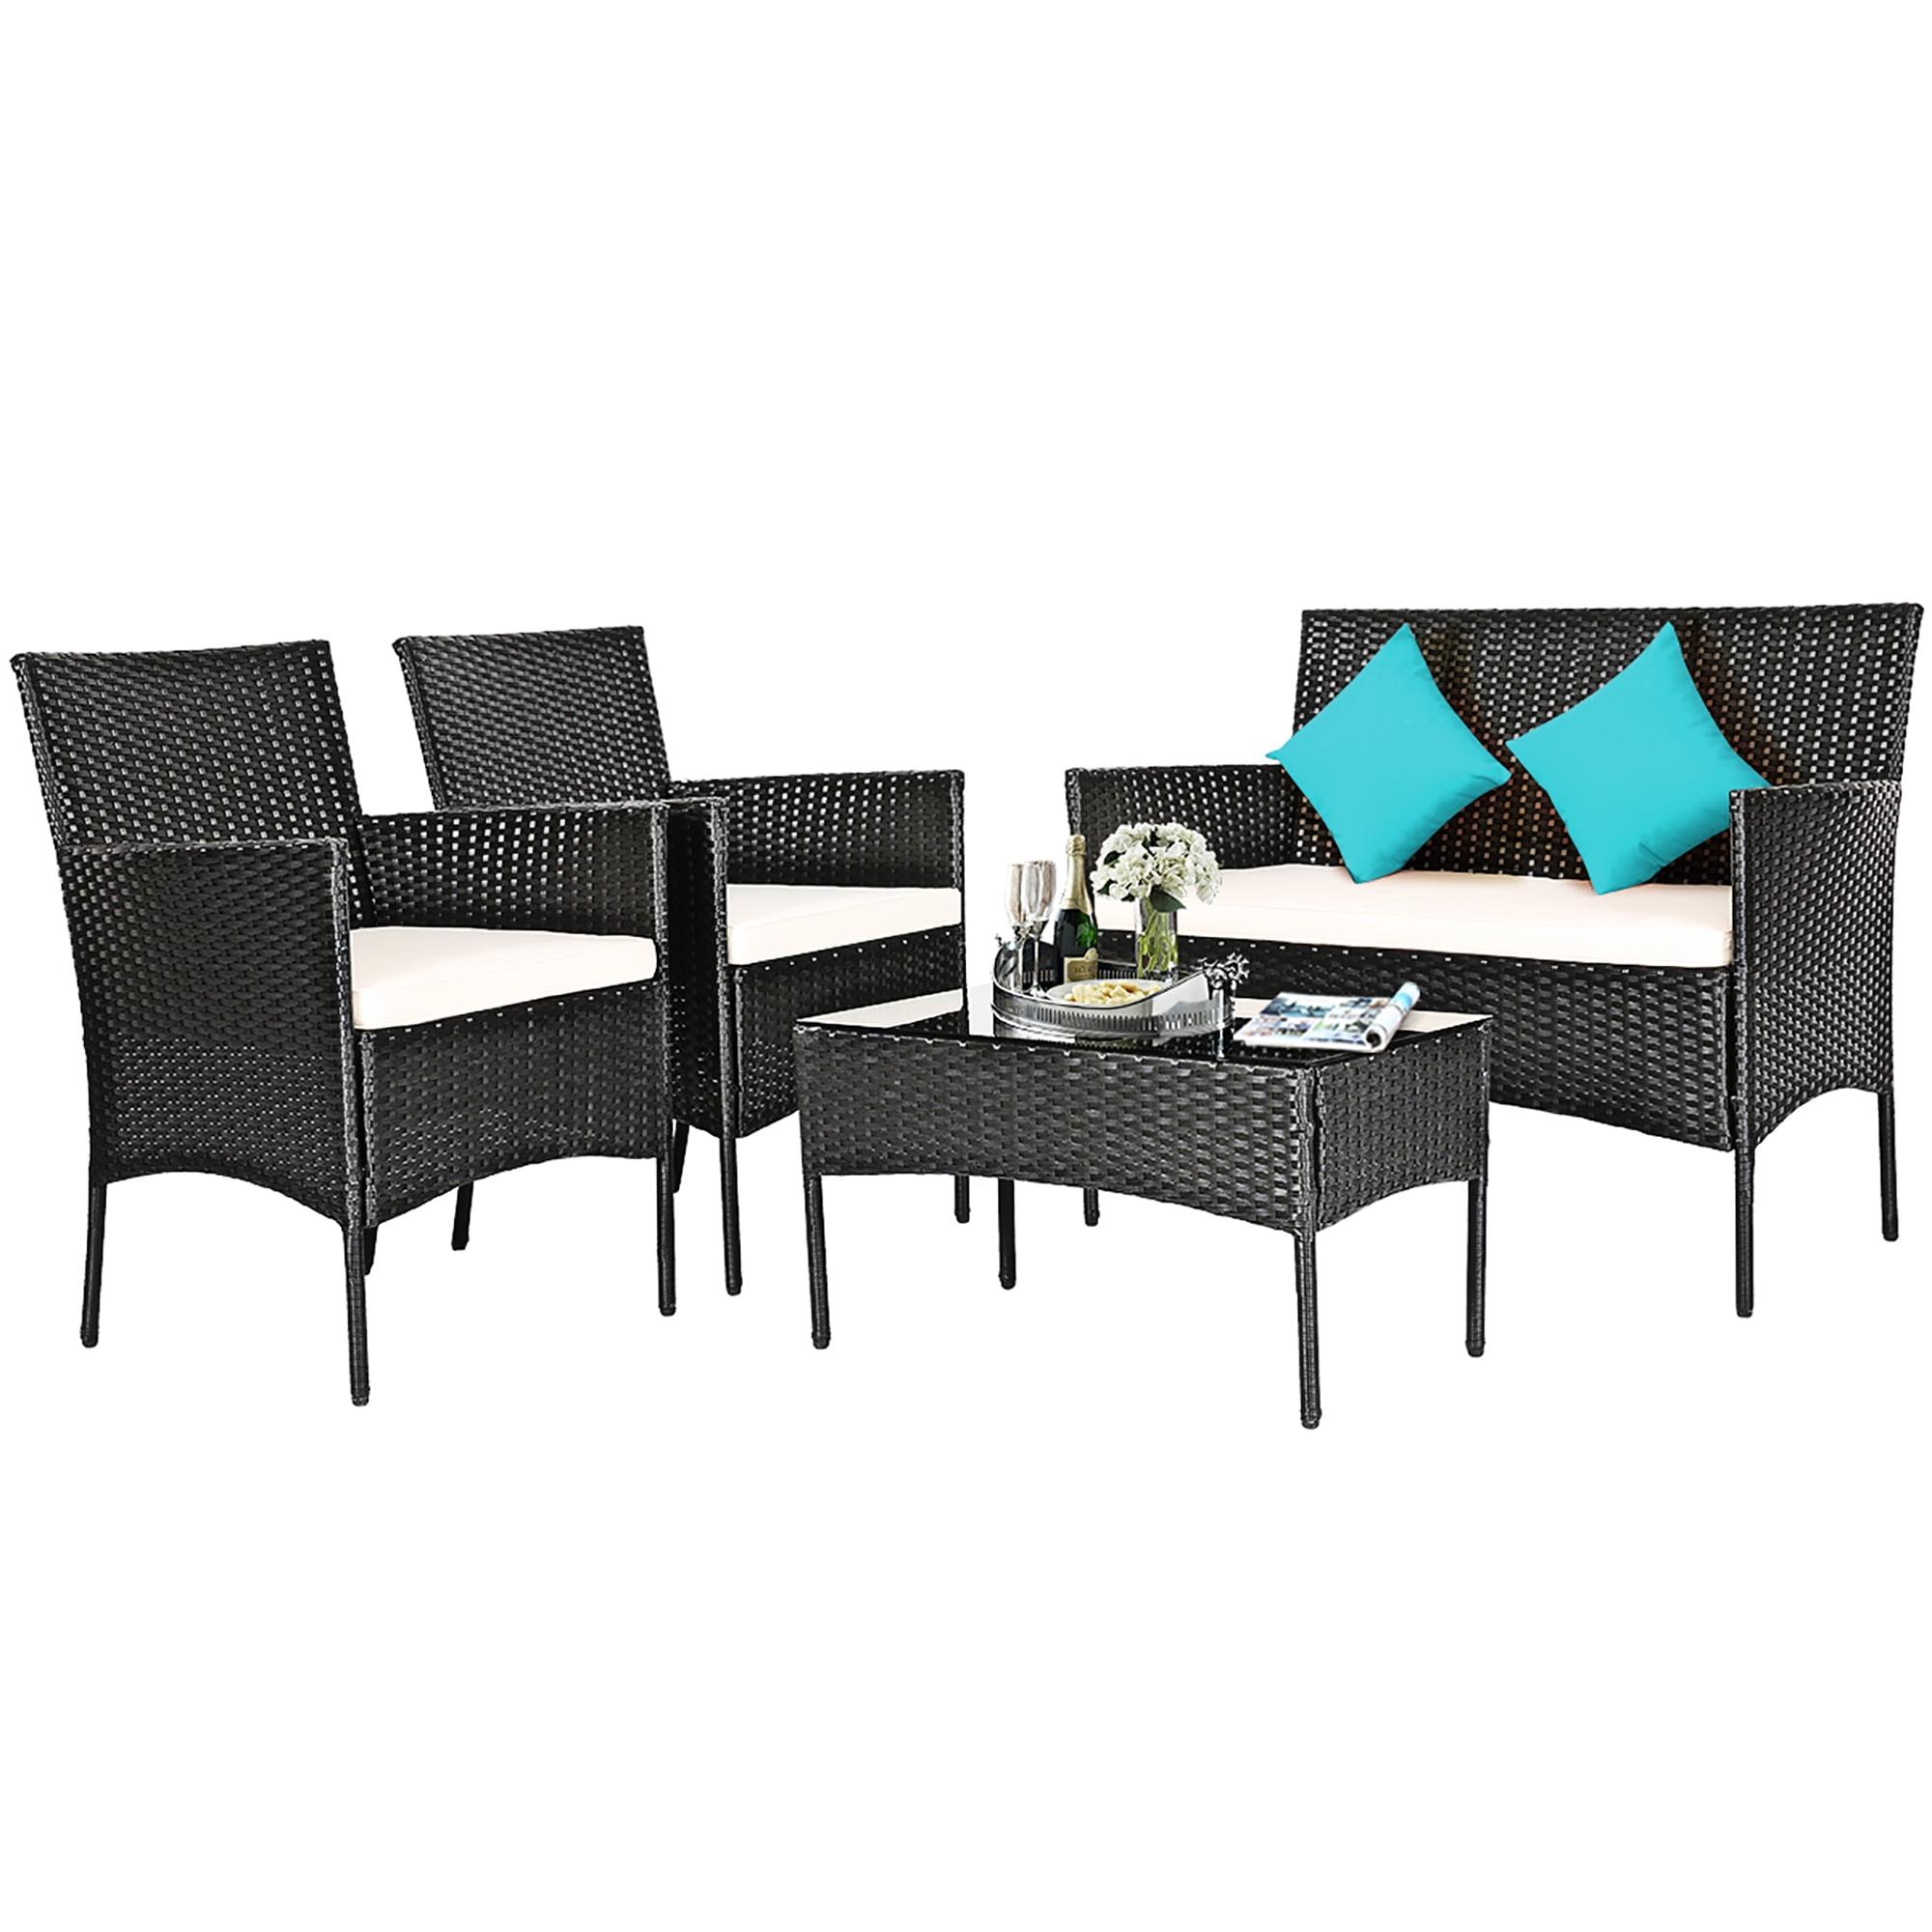 All-Weather PE Rattan and Steel 4-Piece Patio Set with Cushions